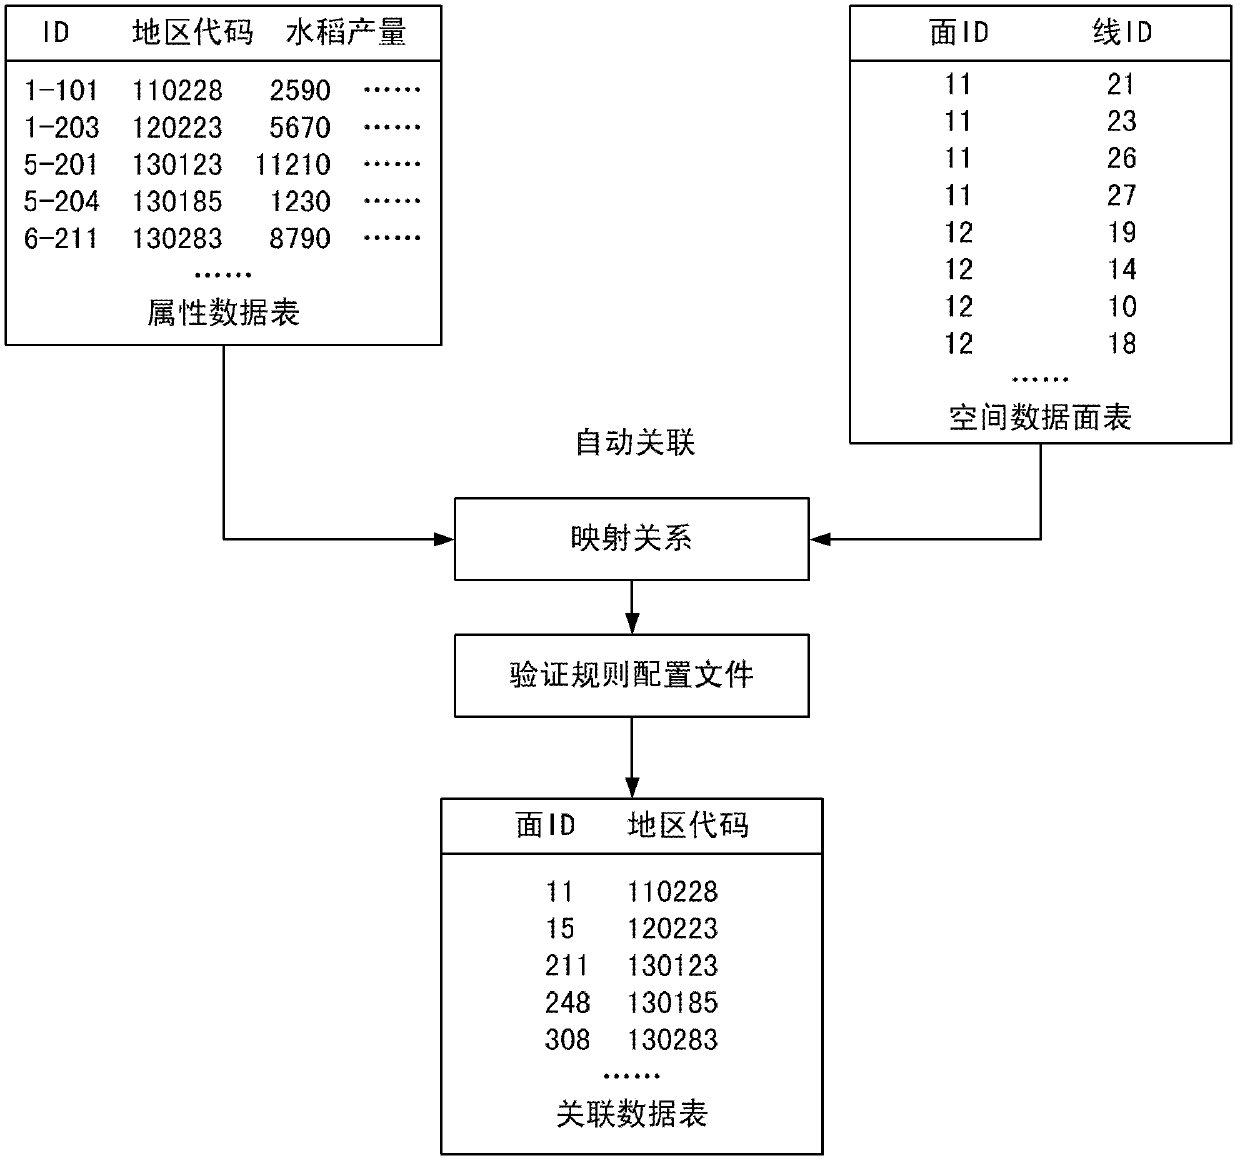 Agricultural economy electronic map data service interface method